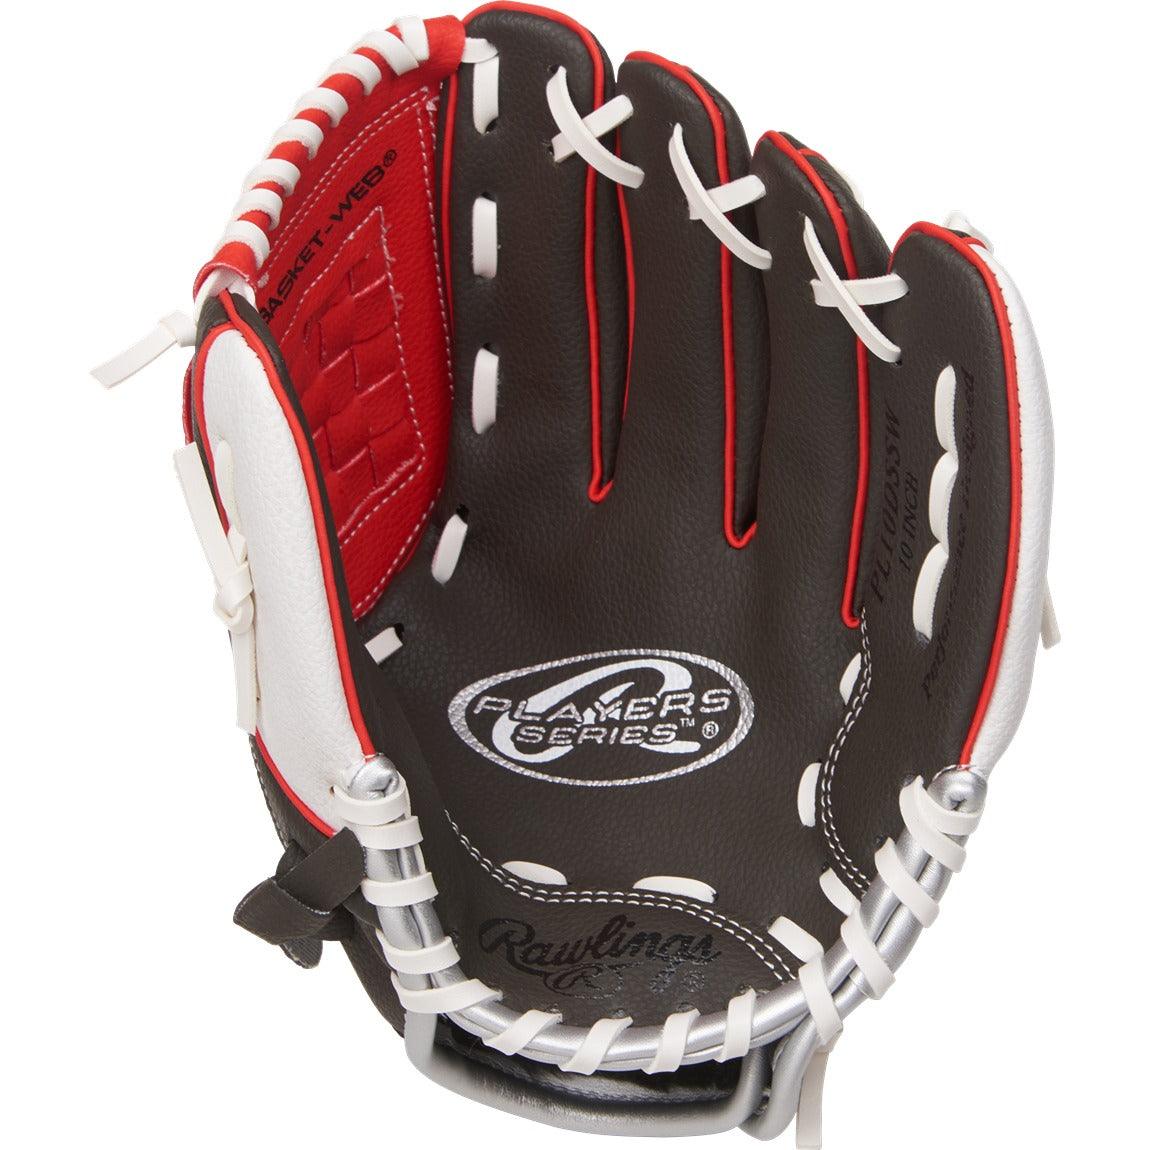 Players 10" Baseball Glove - Youth - Sports Excellence